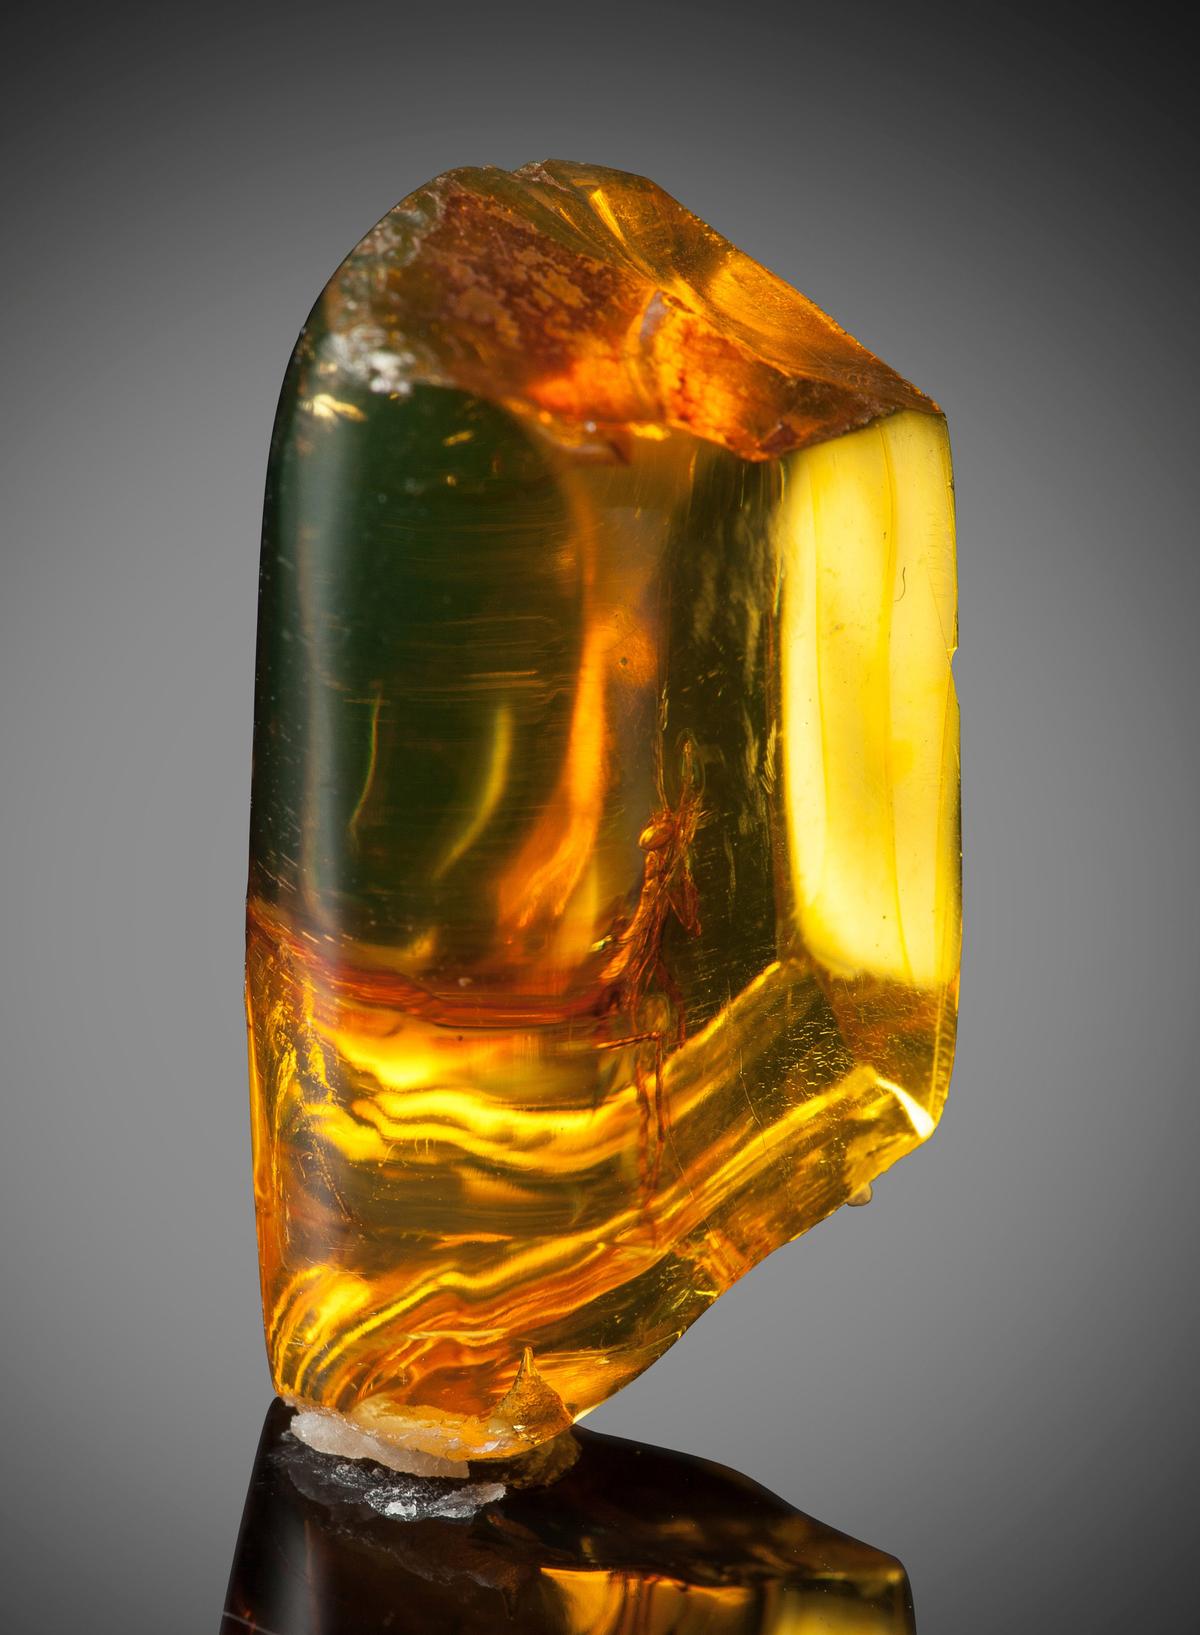 The fossilized amber containing the insect measures just over an inch—about the size of a cough drop. (Courtesy of Heritage Auctions, HA.com)